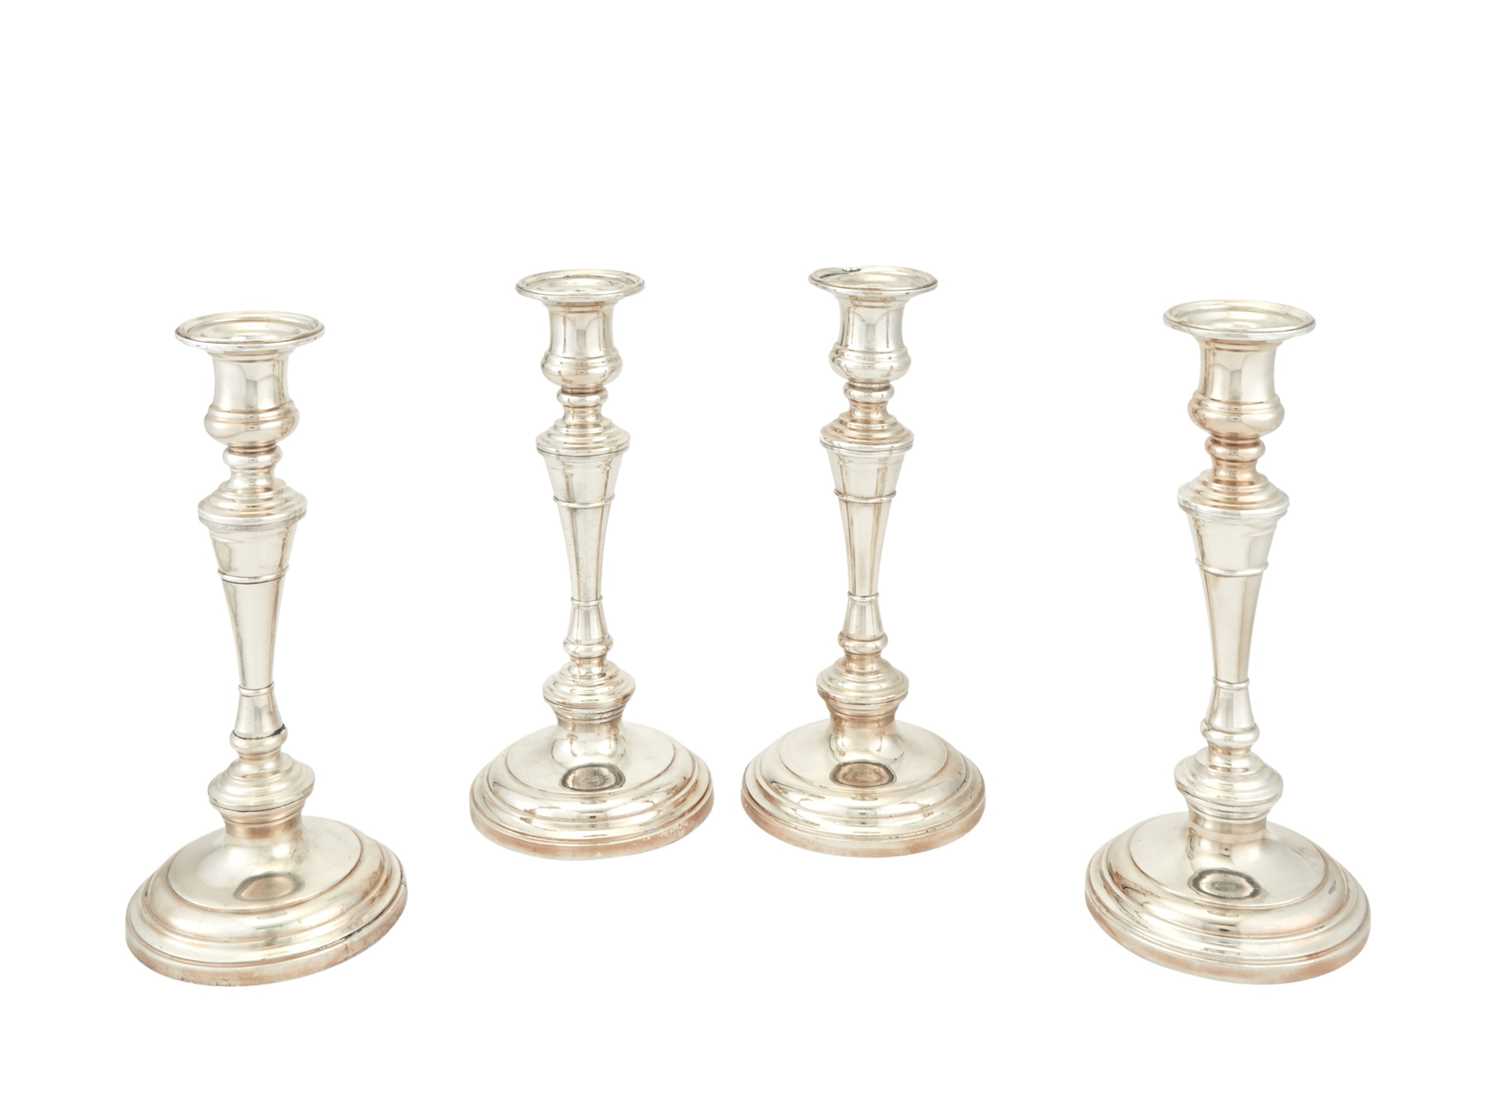 Lot 157 - Set of Four S. Kirk & Son Sterling Silver Candlesticks